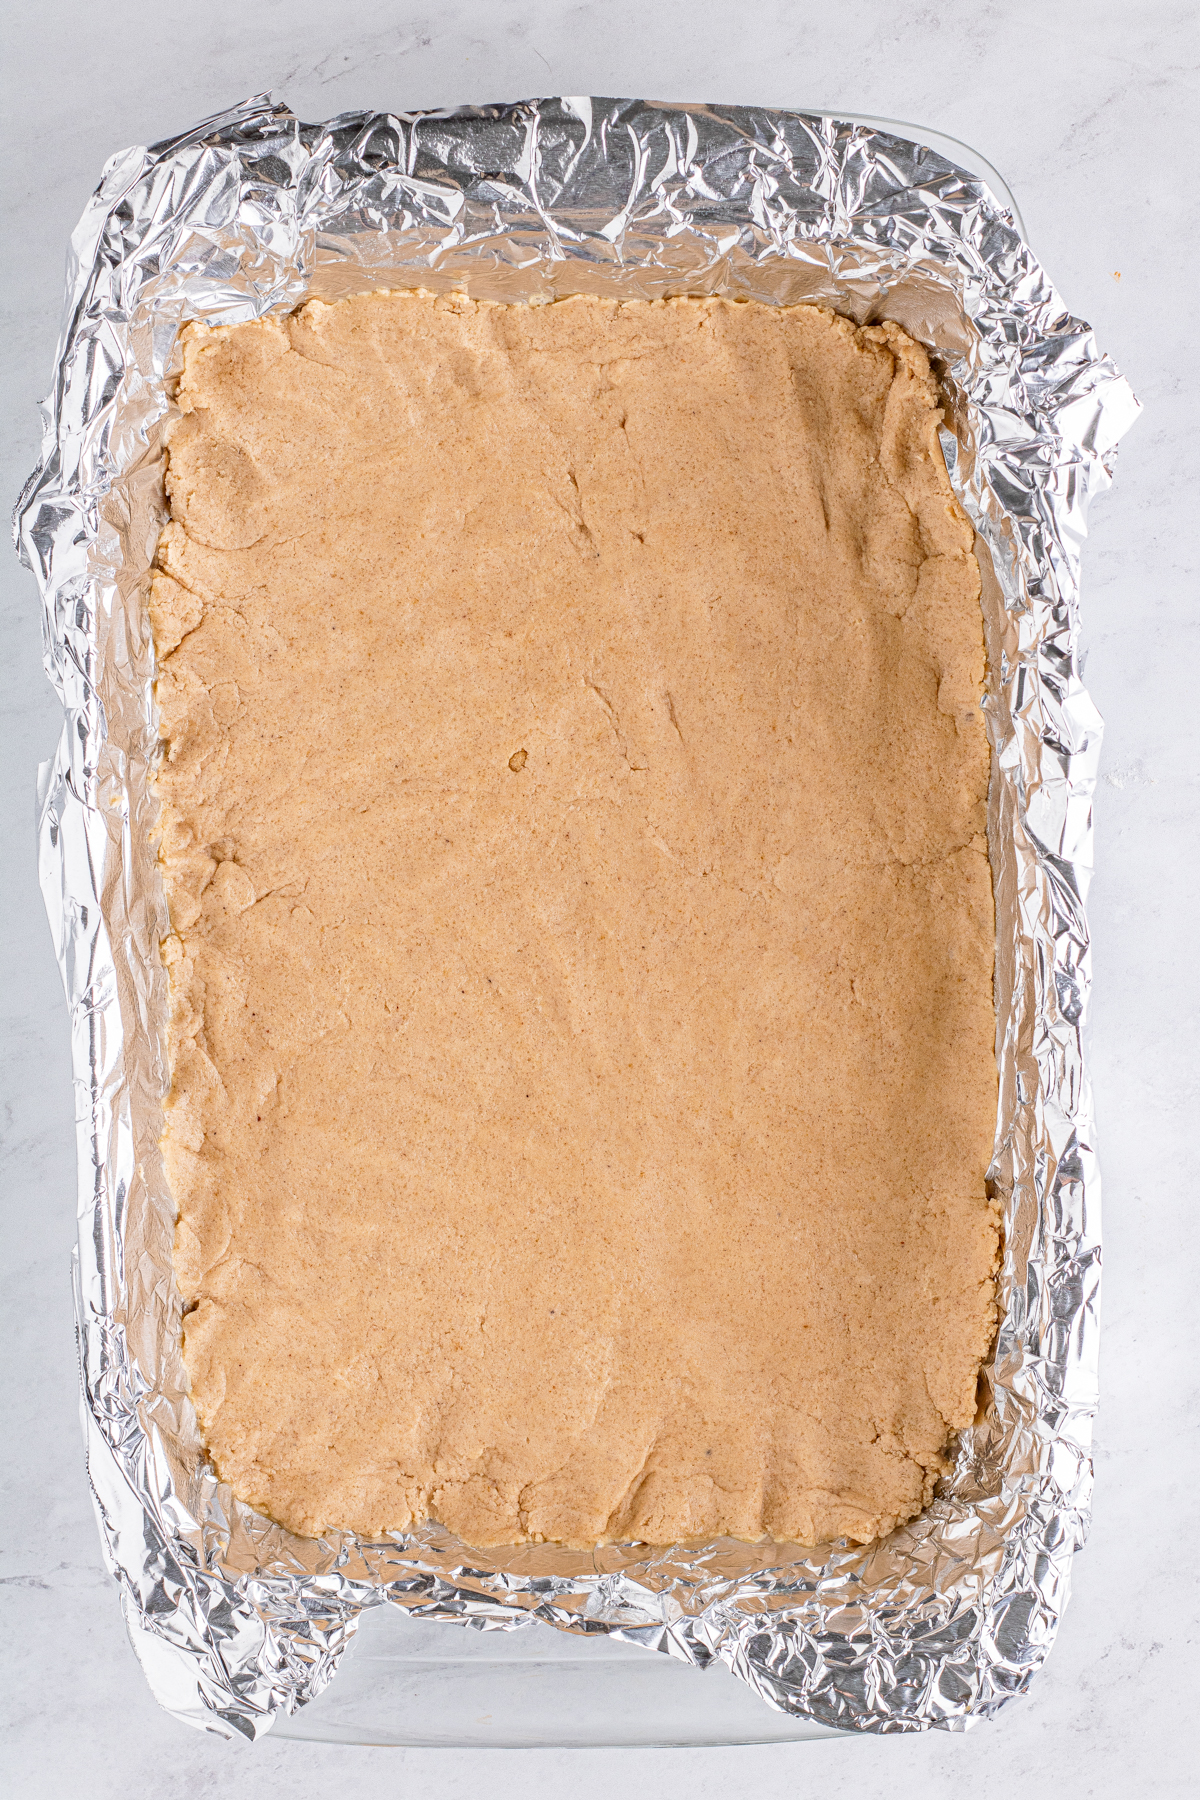 unbaked shortbread crust in a glass pan